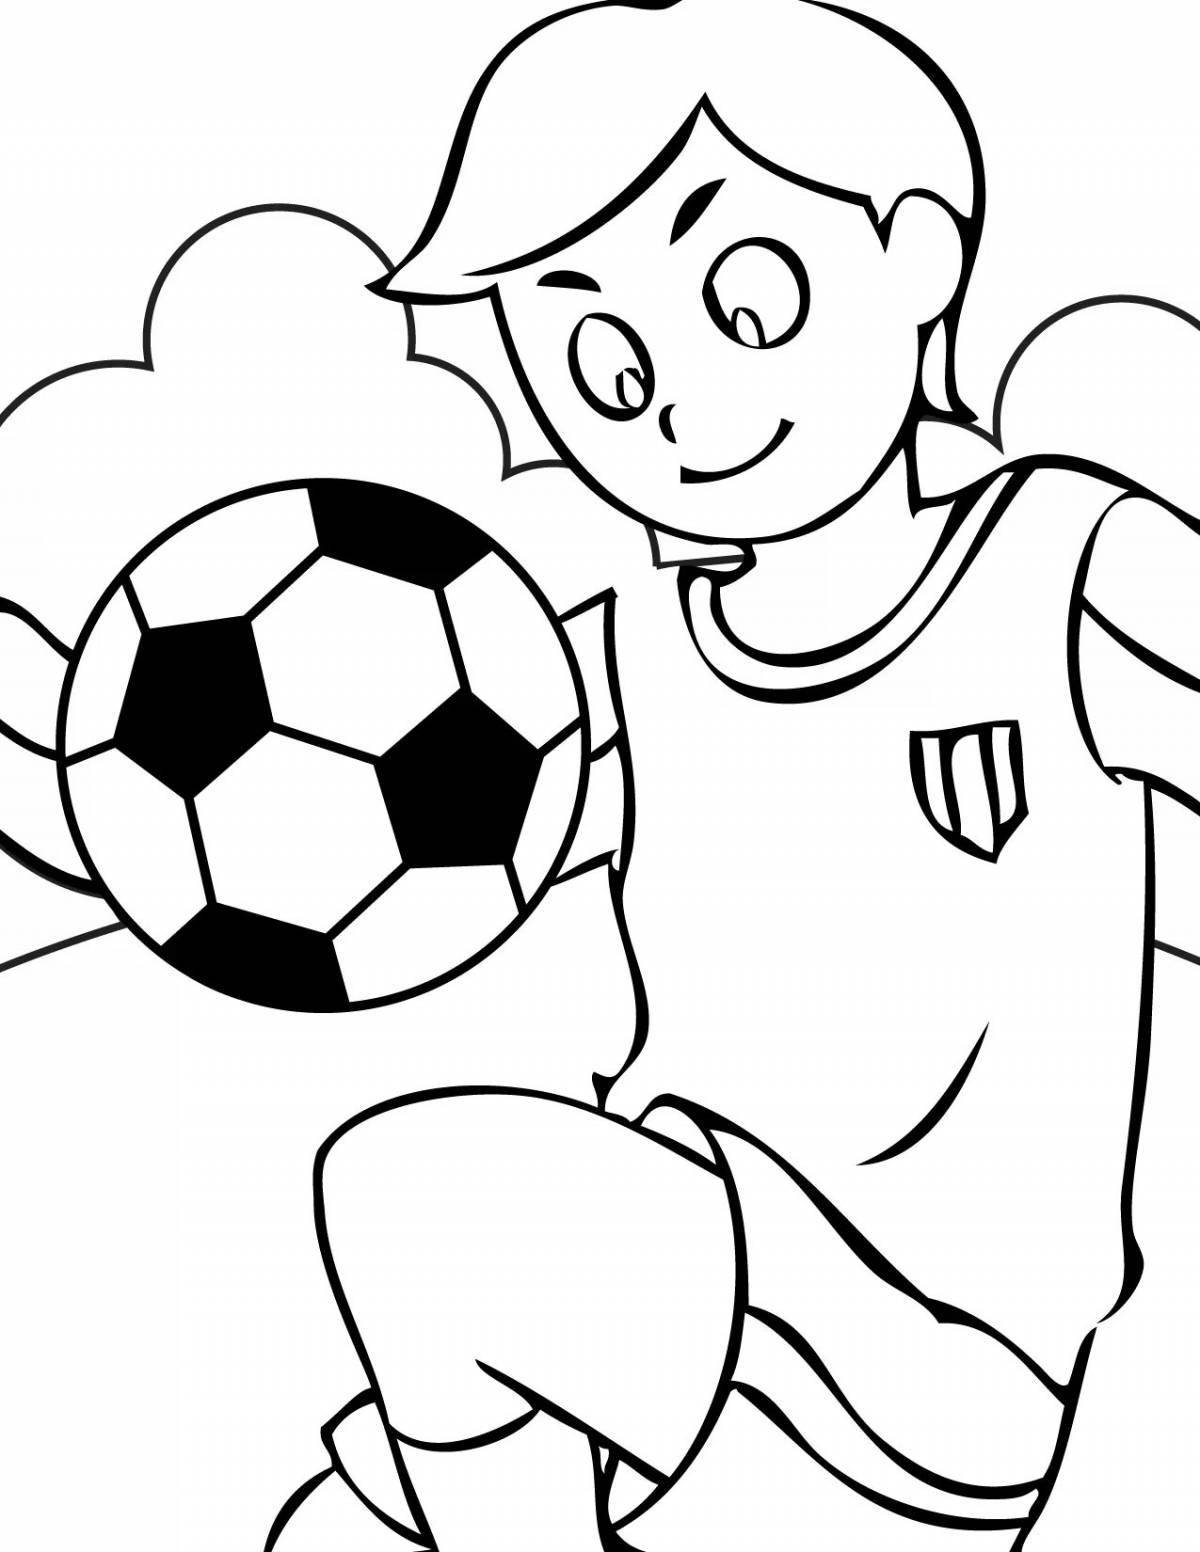 Coloring page boy football player with enthusiasm